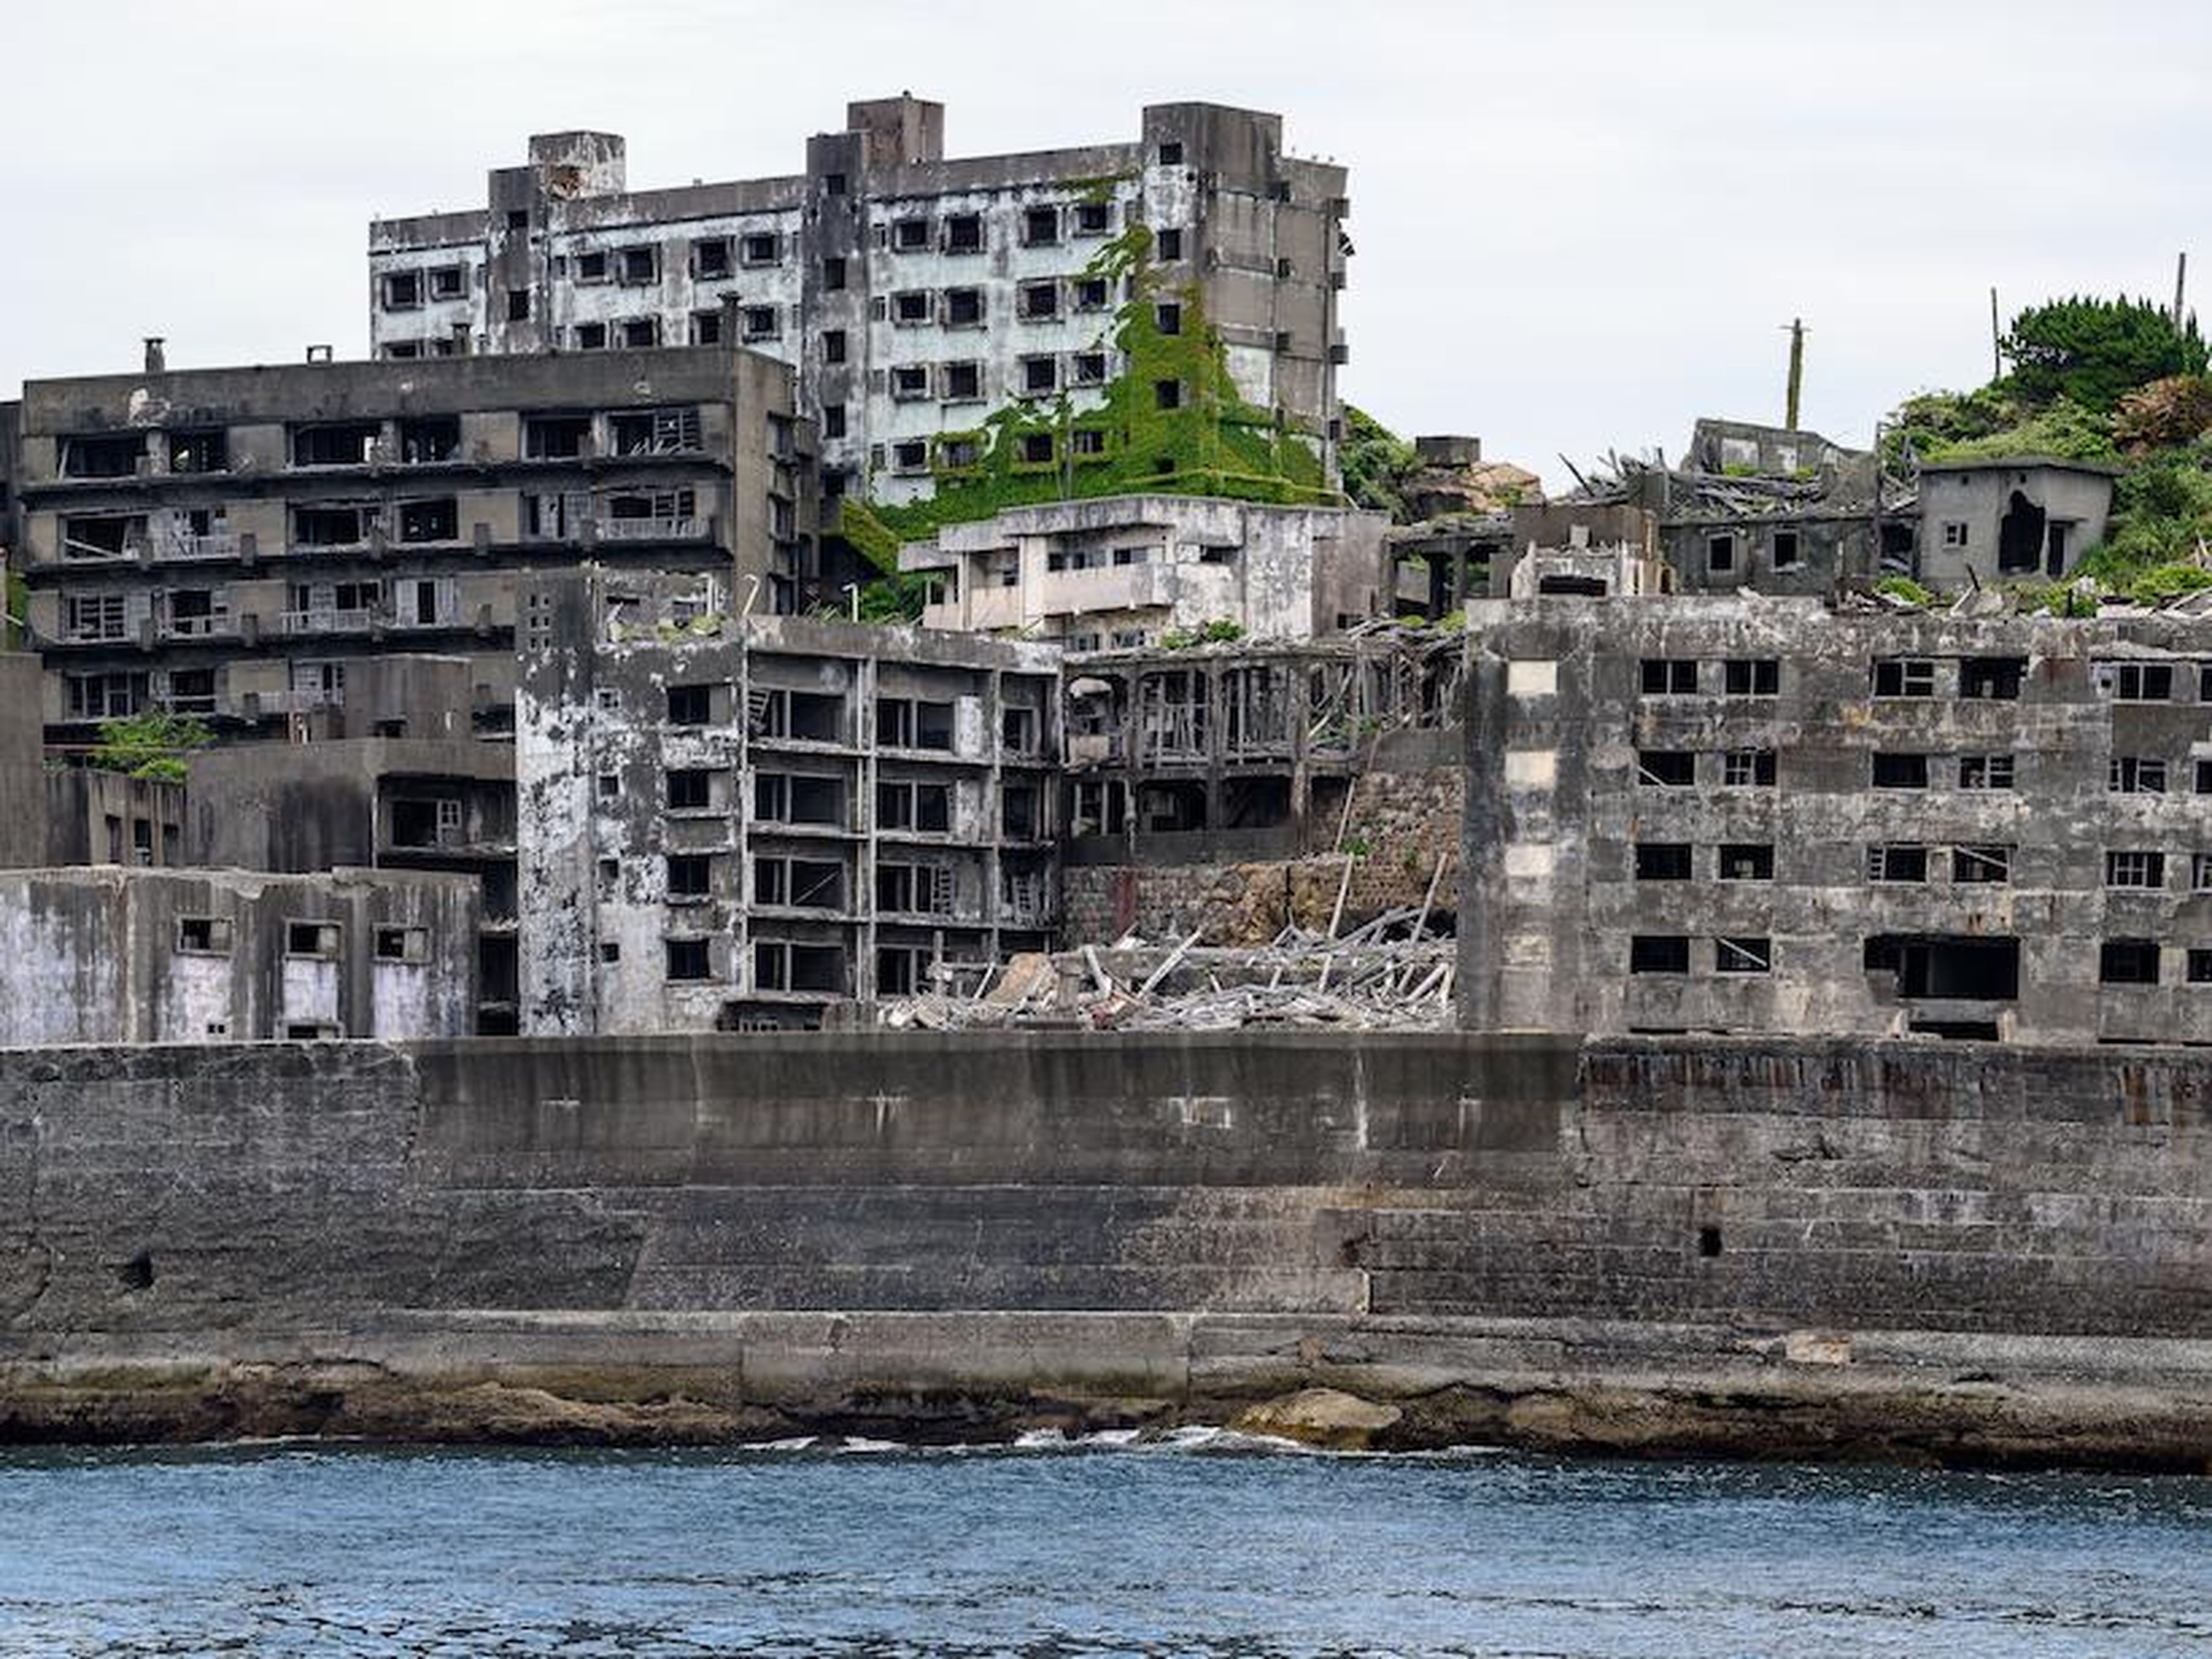 This ghostly abandoned island was used as the villain's lair in a James Bond movie.